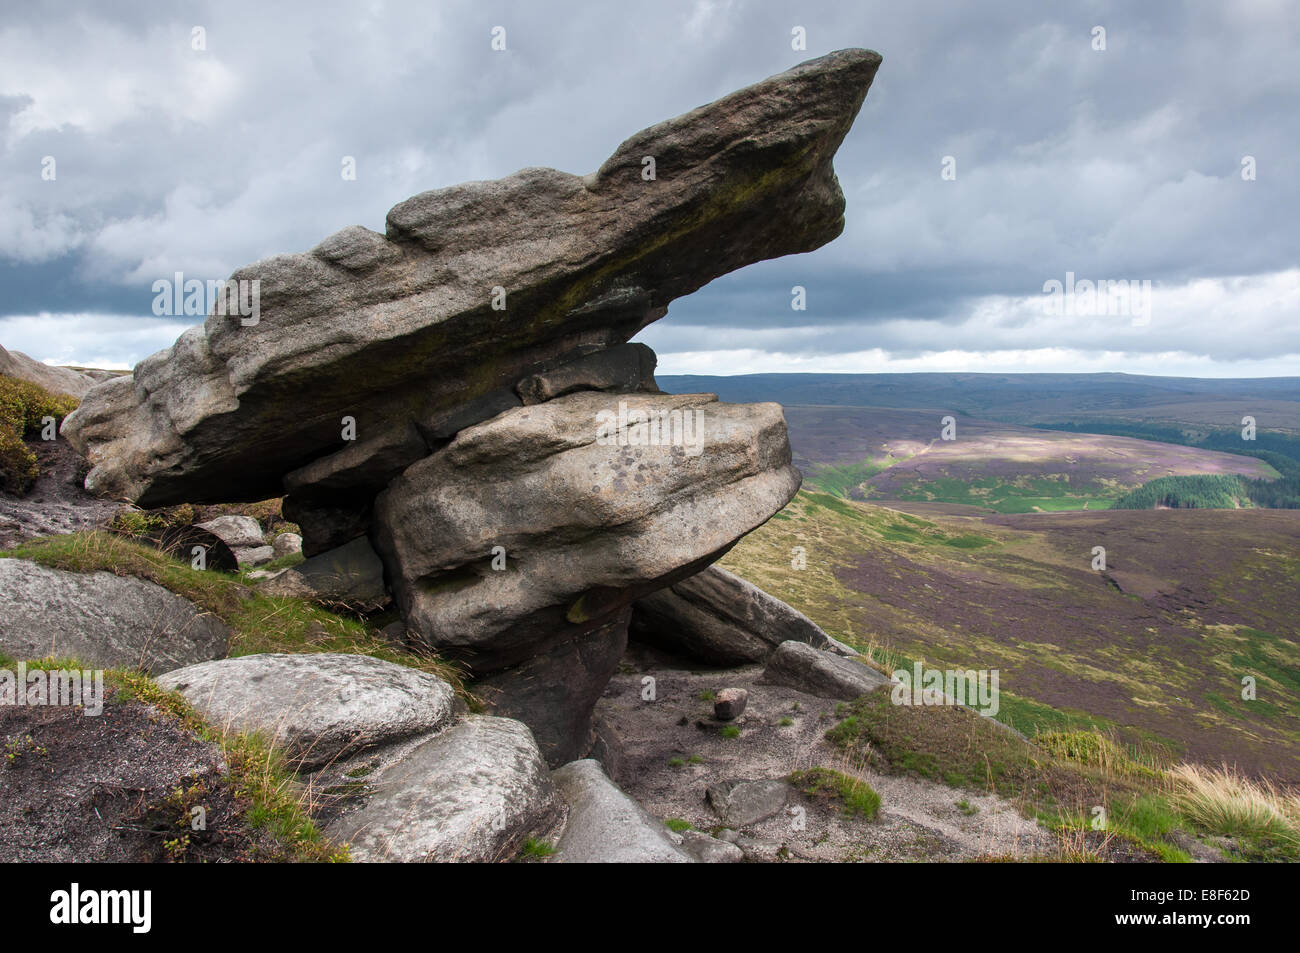 Dramatic gritstone rock formations on Kinder Scout, Peak District, Derbyshire, England. Stock Photo